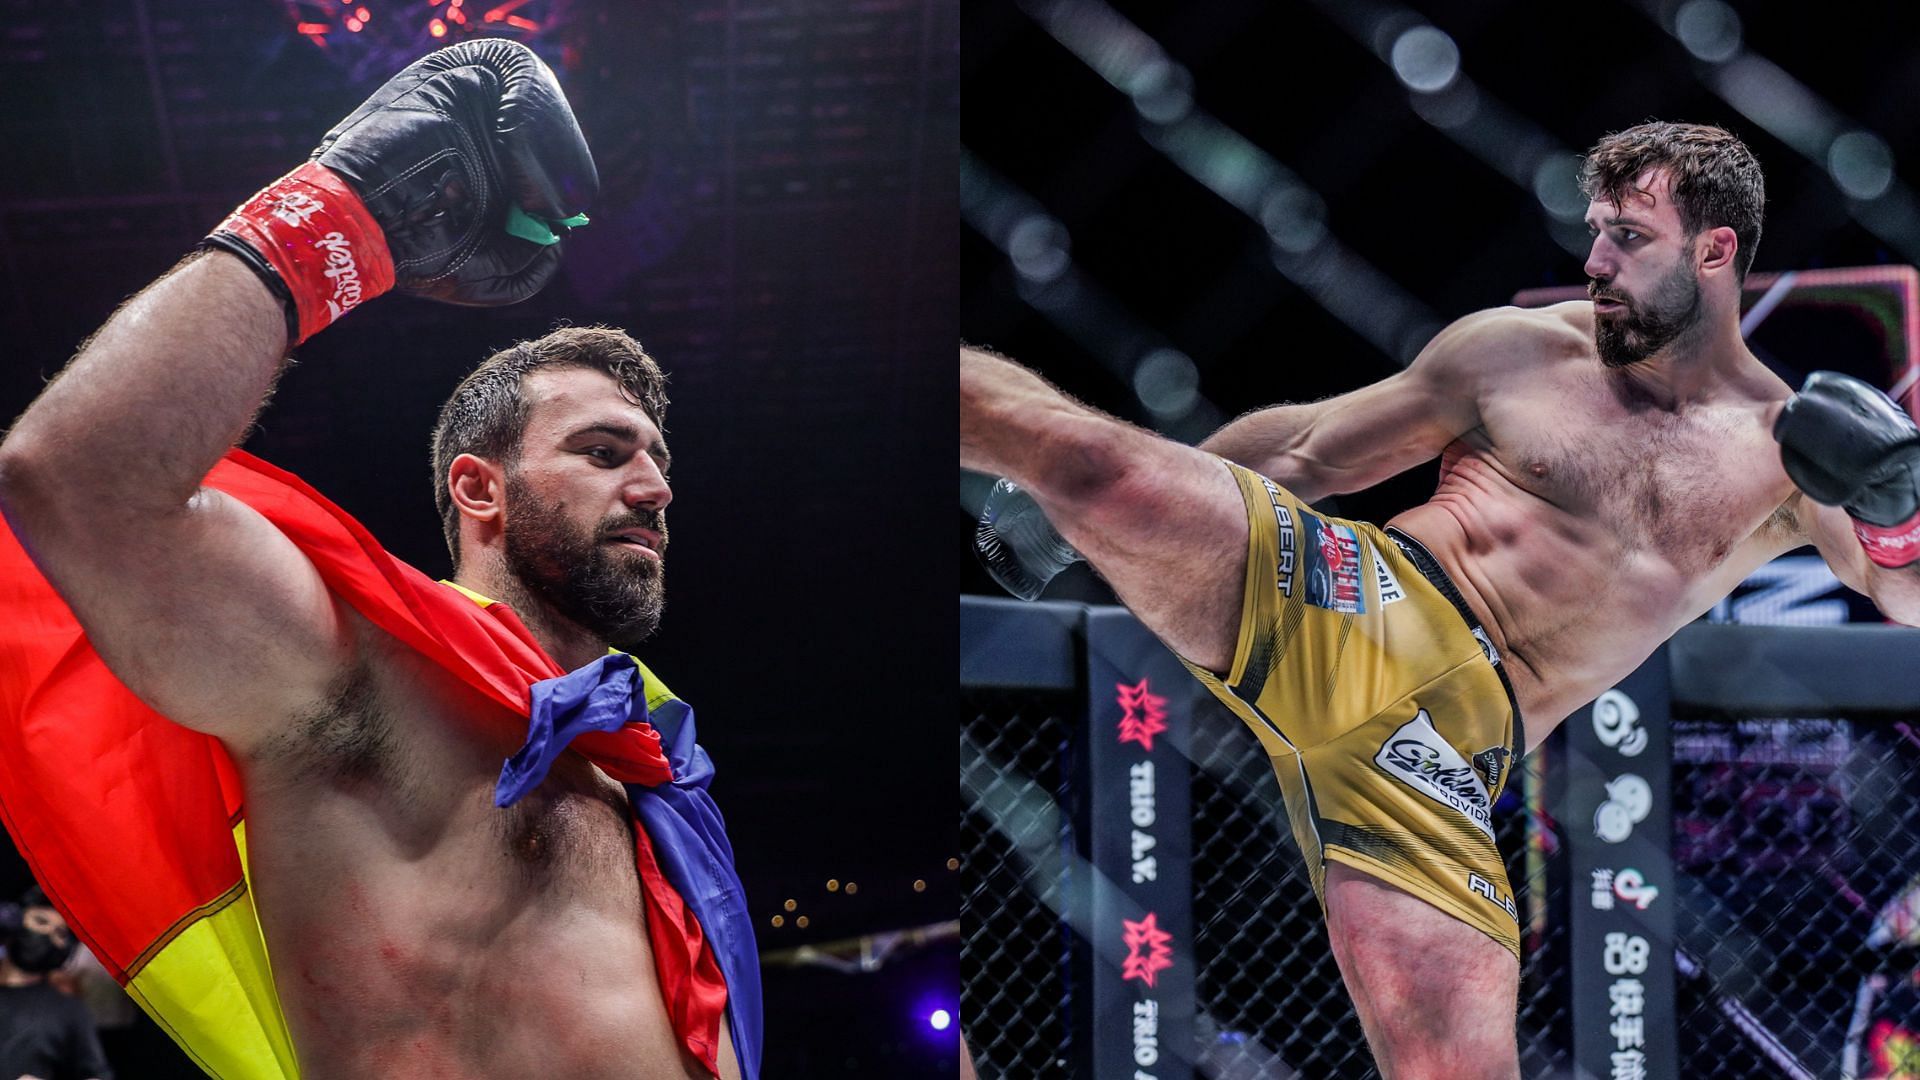 Andrei Stoica [Photo Credits: ONE Championship]